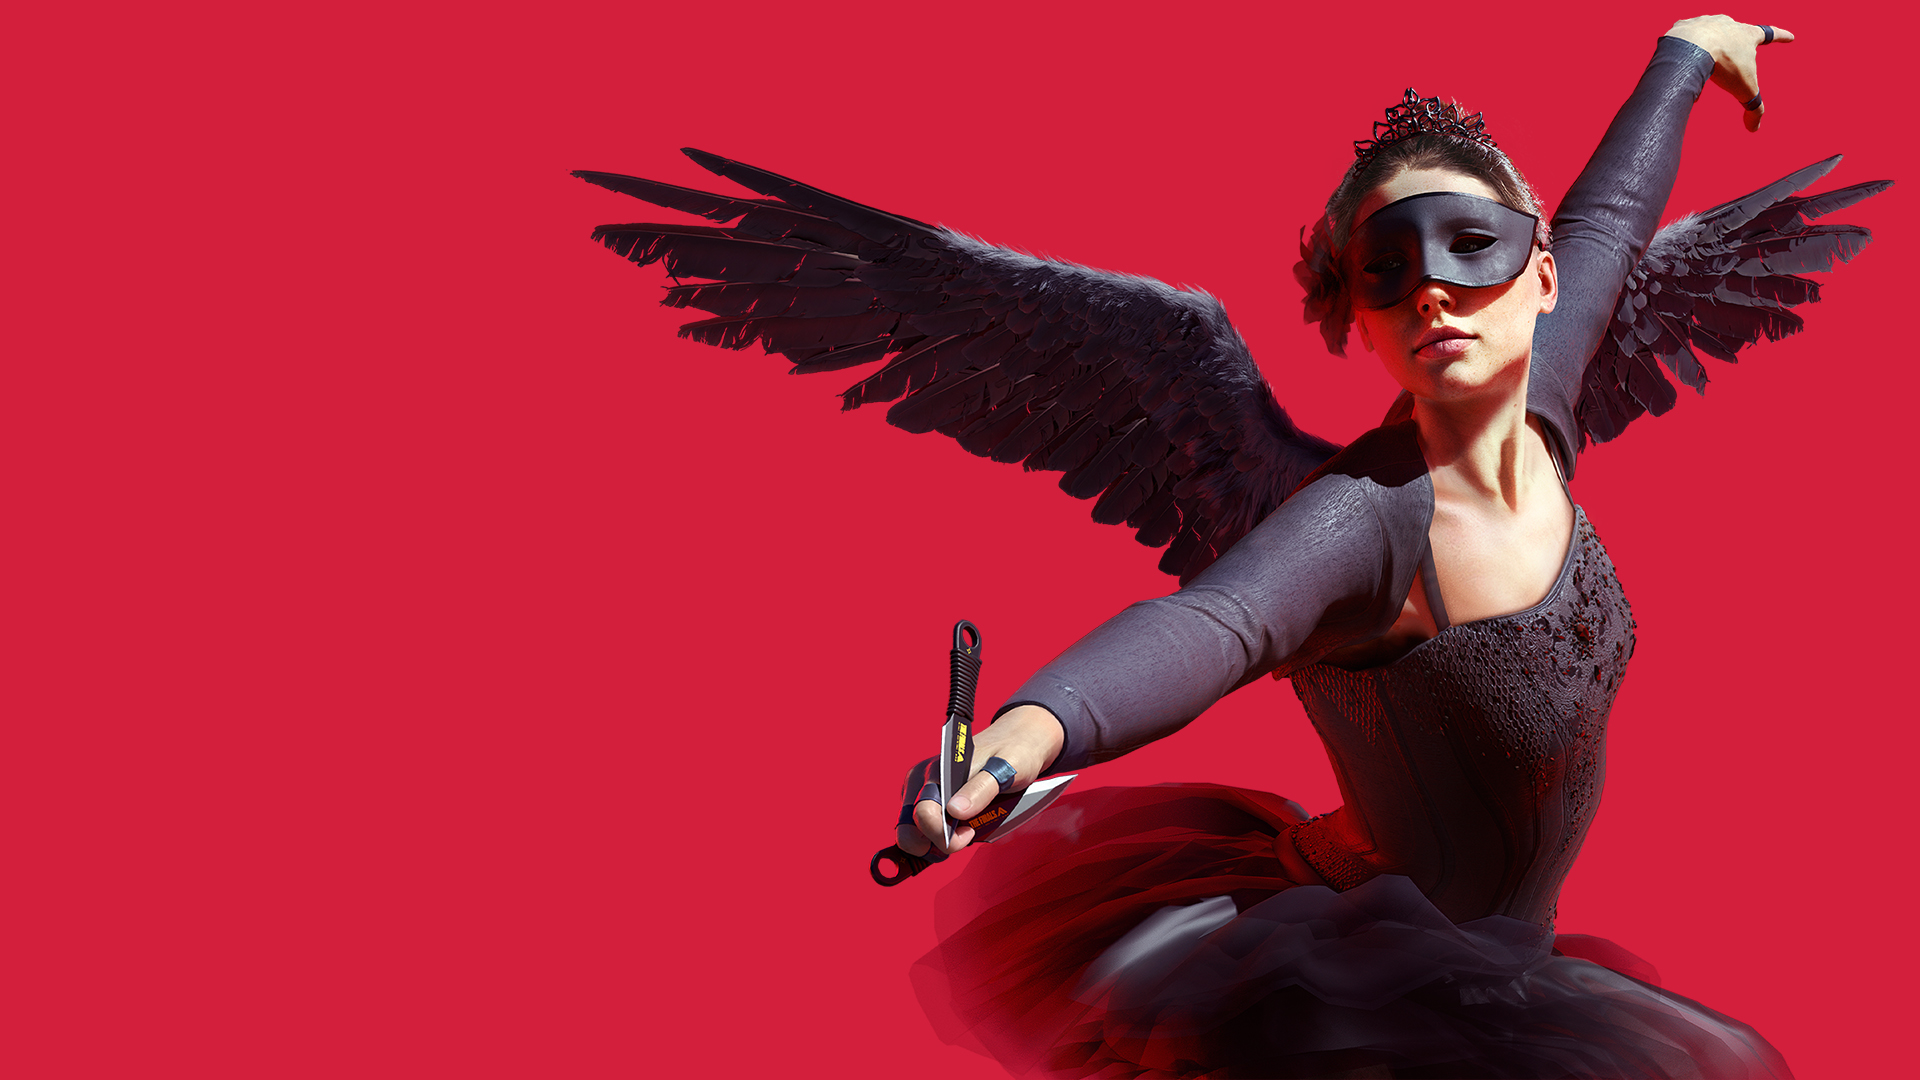 General 1920x1080 the finals video games video game art face mask video game characters CGI video game girls knife red background mask simple background wings minimalism dancing ballerina closed mouth tiaras weapon